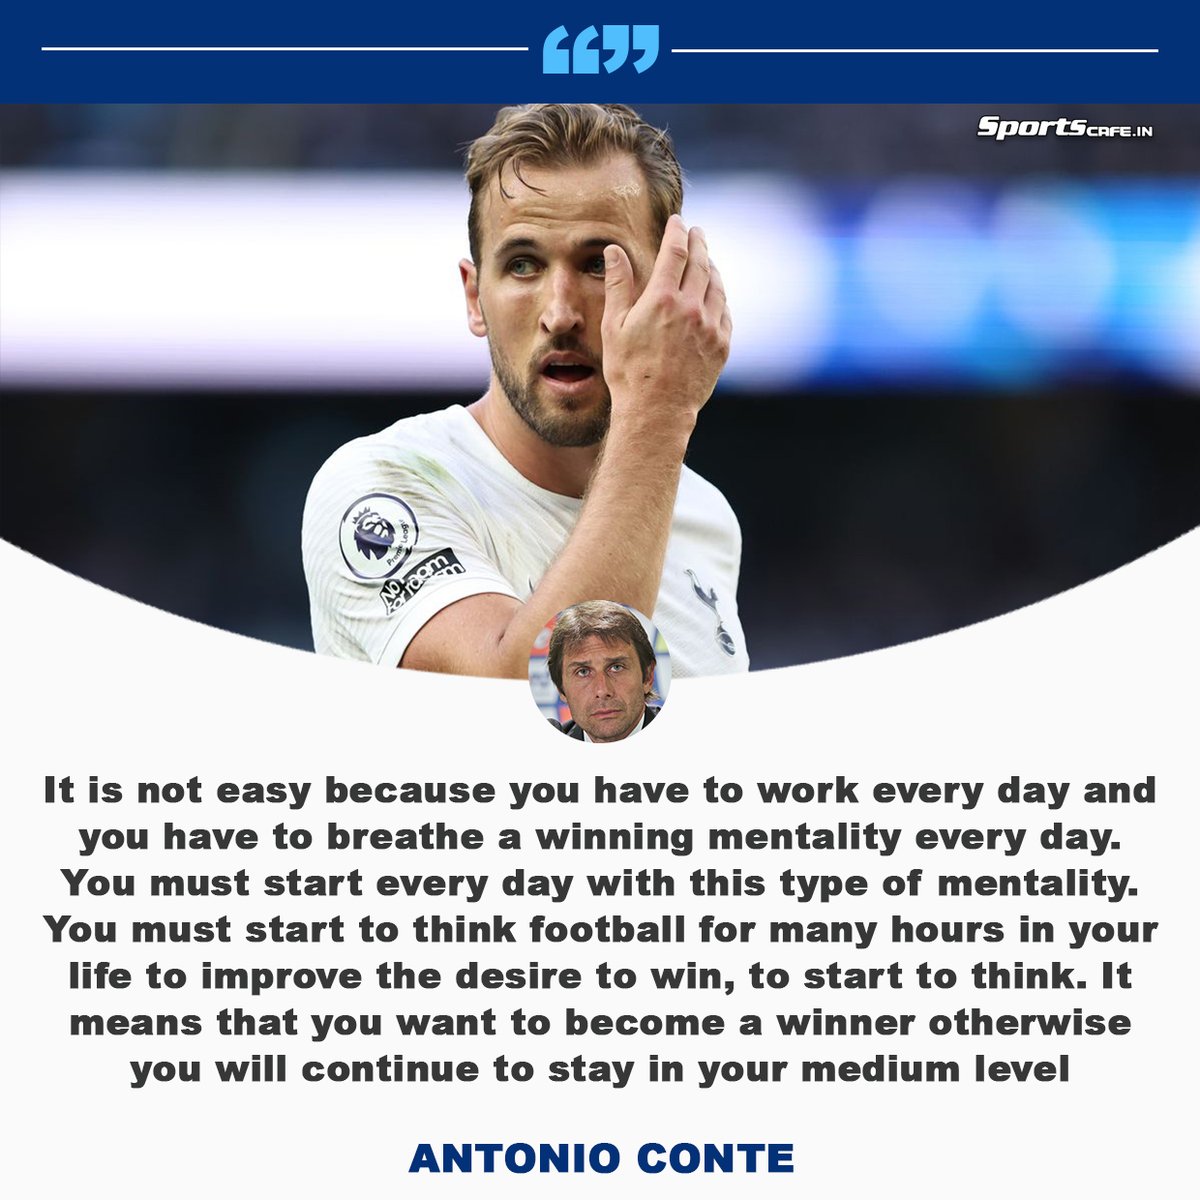 Antonio Conte has admitted that Tottenham is not ready to challenge for the Premier League title as they haven’t developed the mentality to win yet 

#PremierLeague #Spurs #AntonioConte #harrykane #football https://t.co/MSh7vwz37o